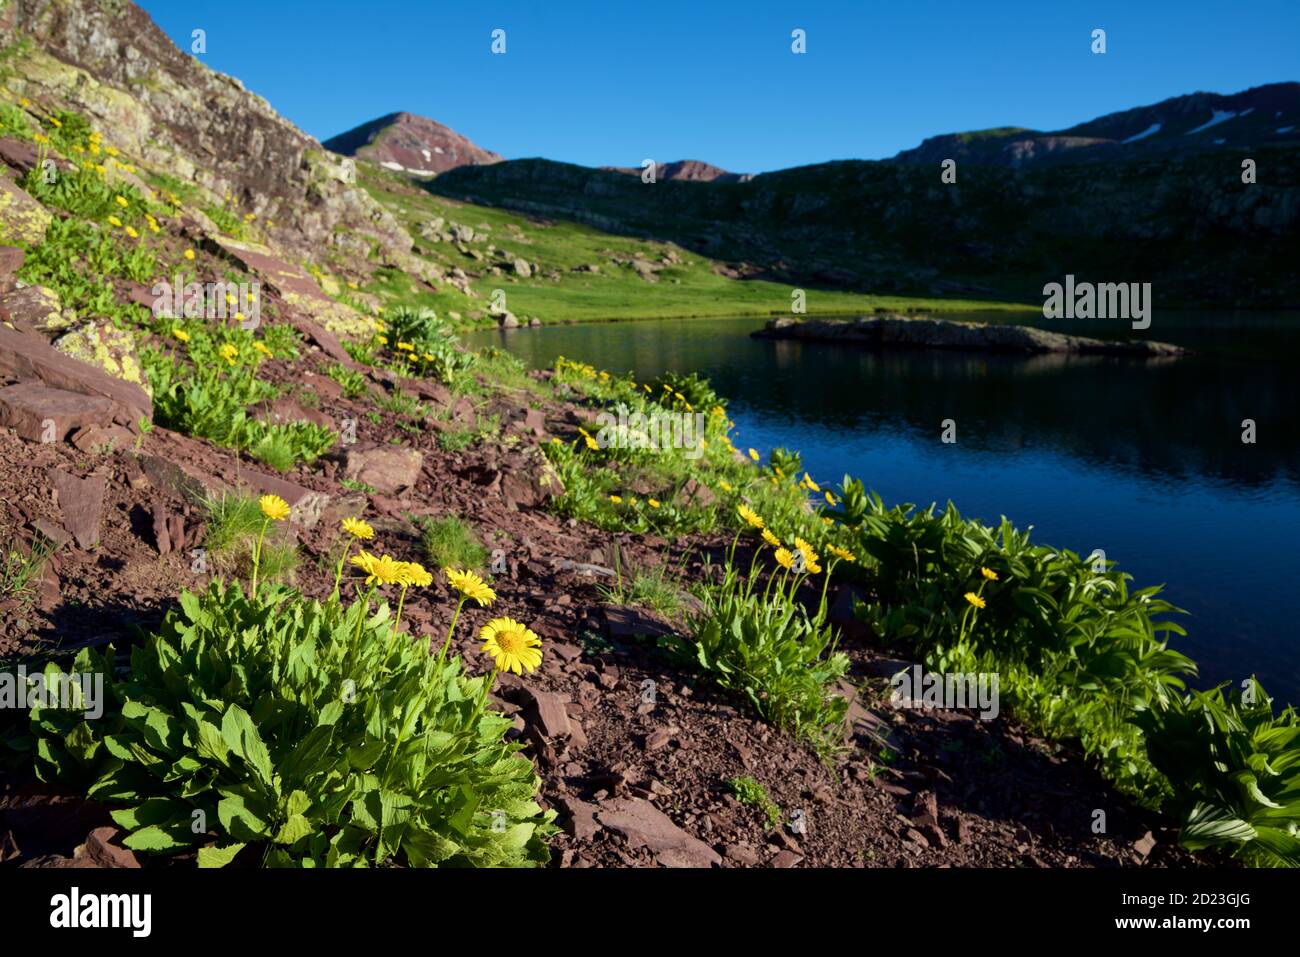 Yellow flowers in Tena Valley, Huesca Province in Aragon, Spain. Stock Photo